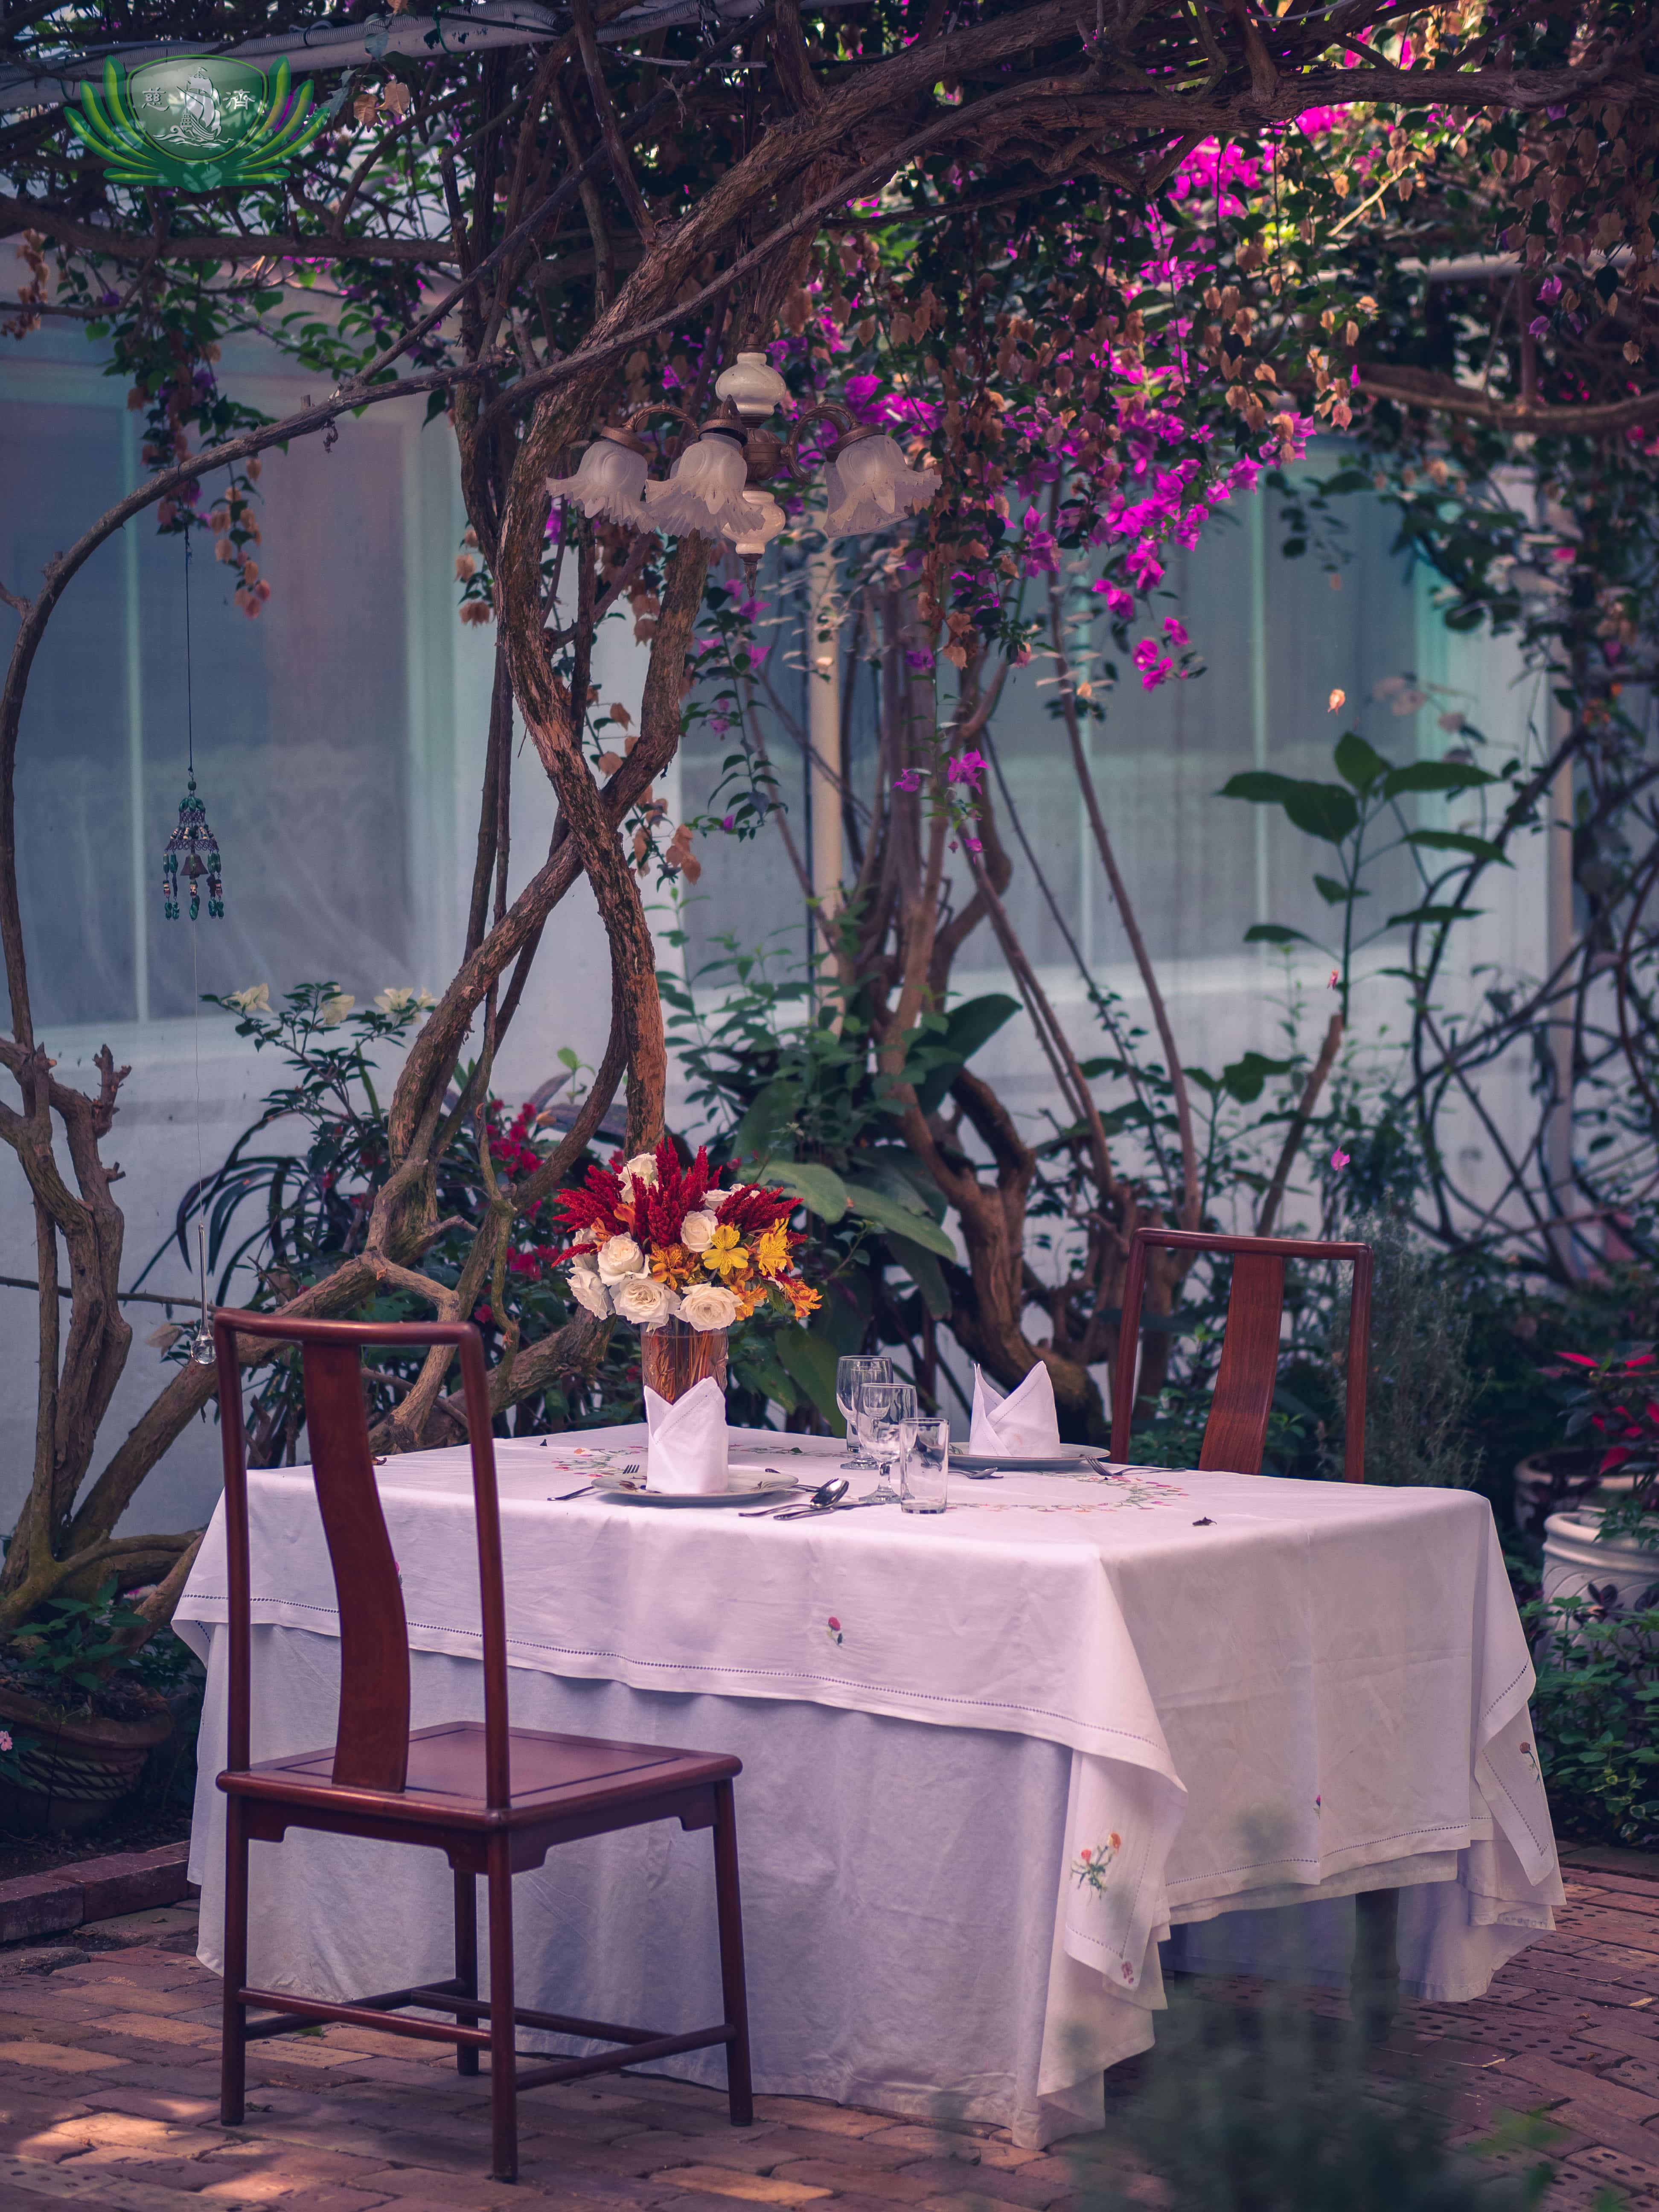 The Proposal Garden where weddings proposals and divorces are signed.【Photo by Daniel Lazar】